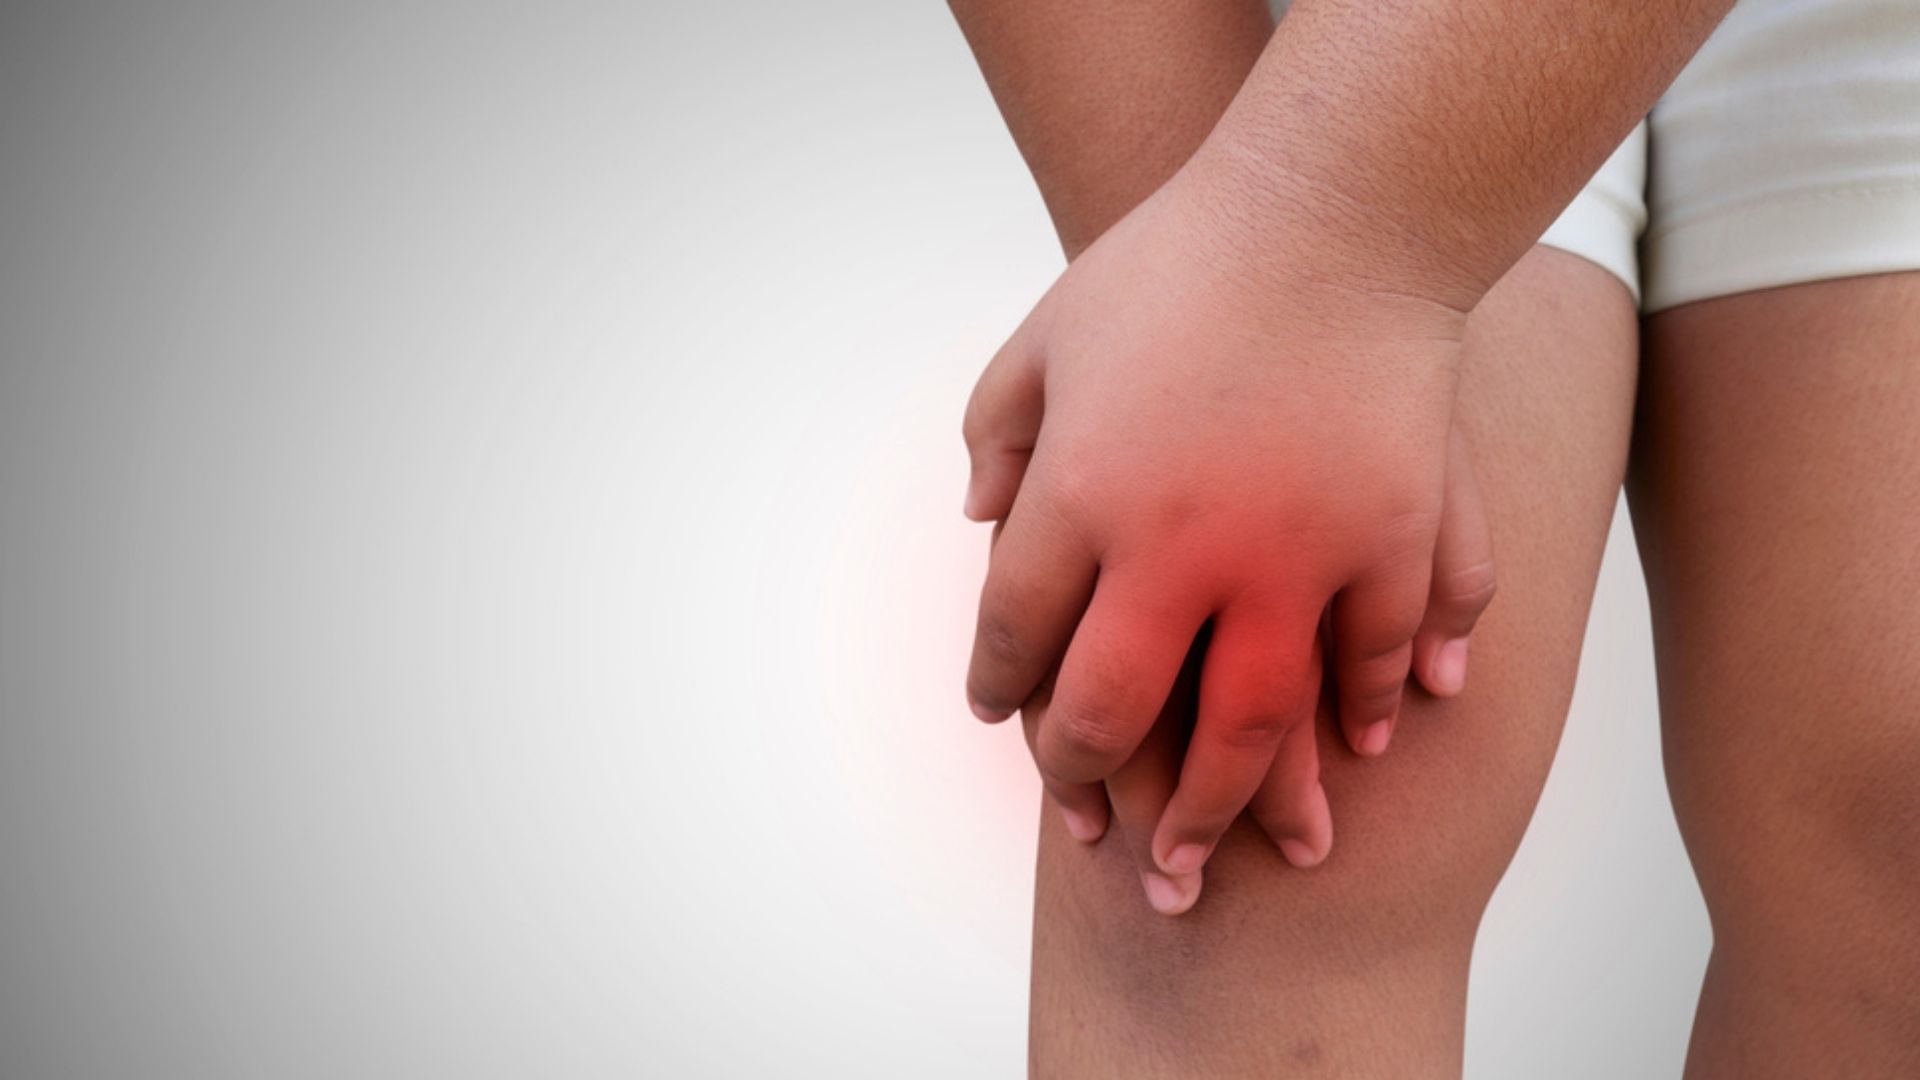 https://propelphysiotherapy.com/wp-content/uploads/2022/03/juvenile-idiopathic-arthritis-treatment-propel-physiotherapy.jpg